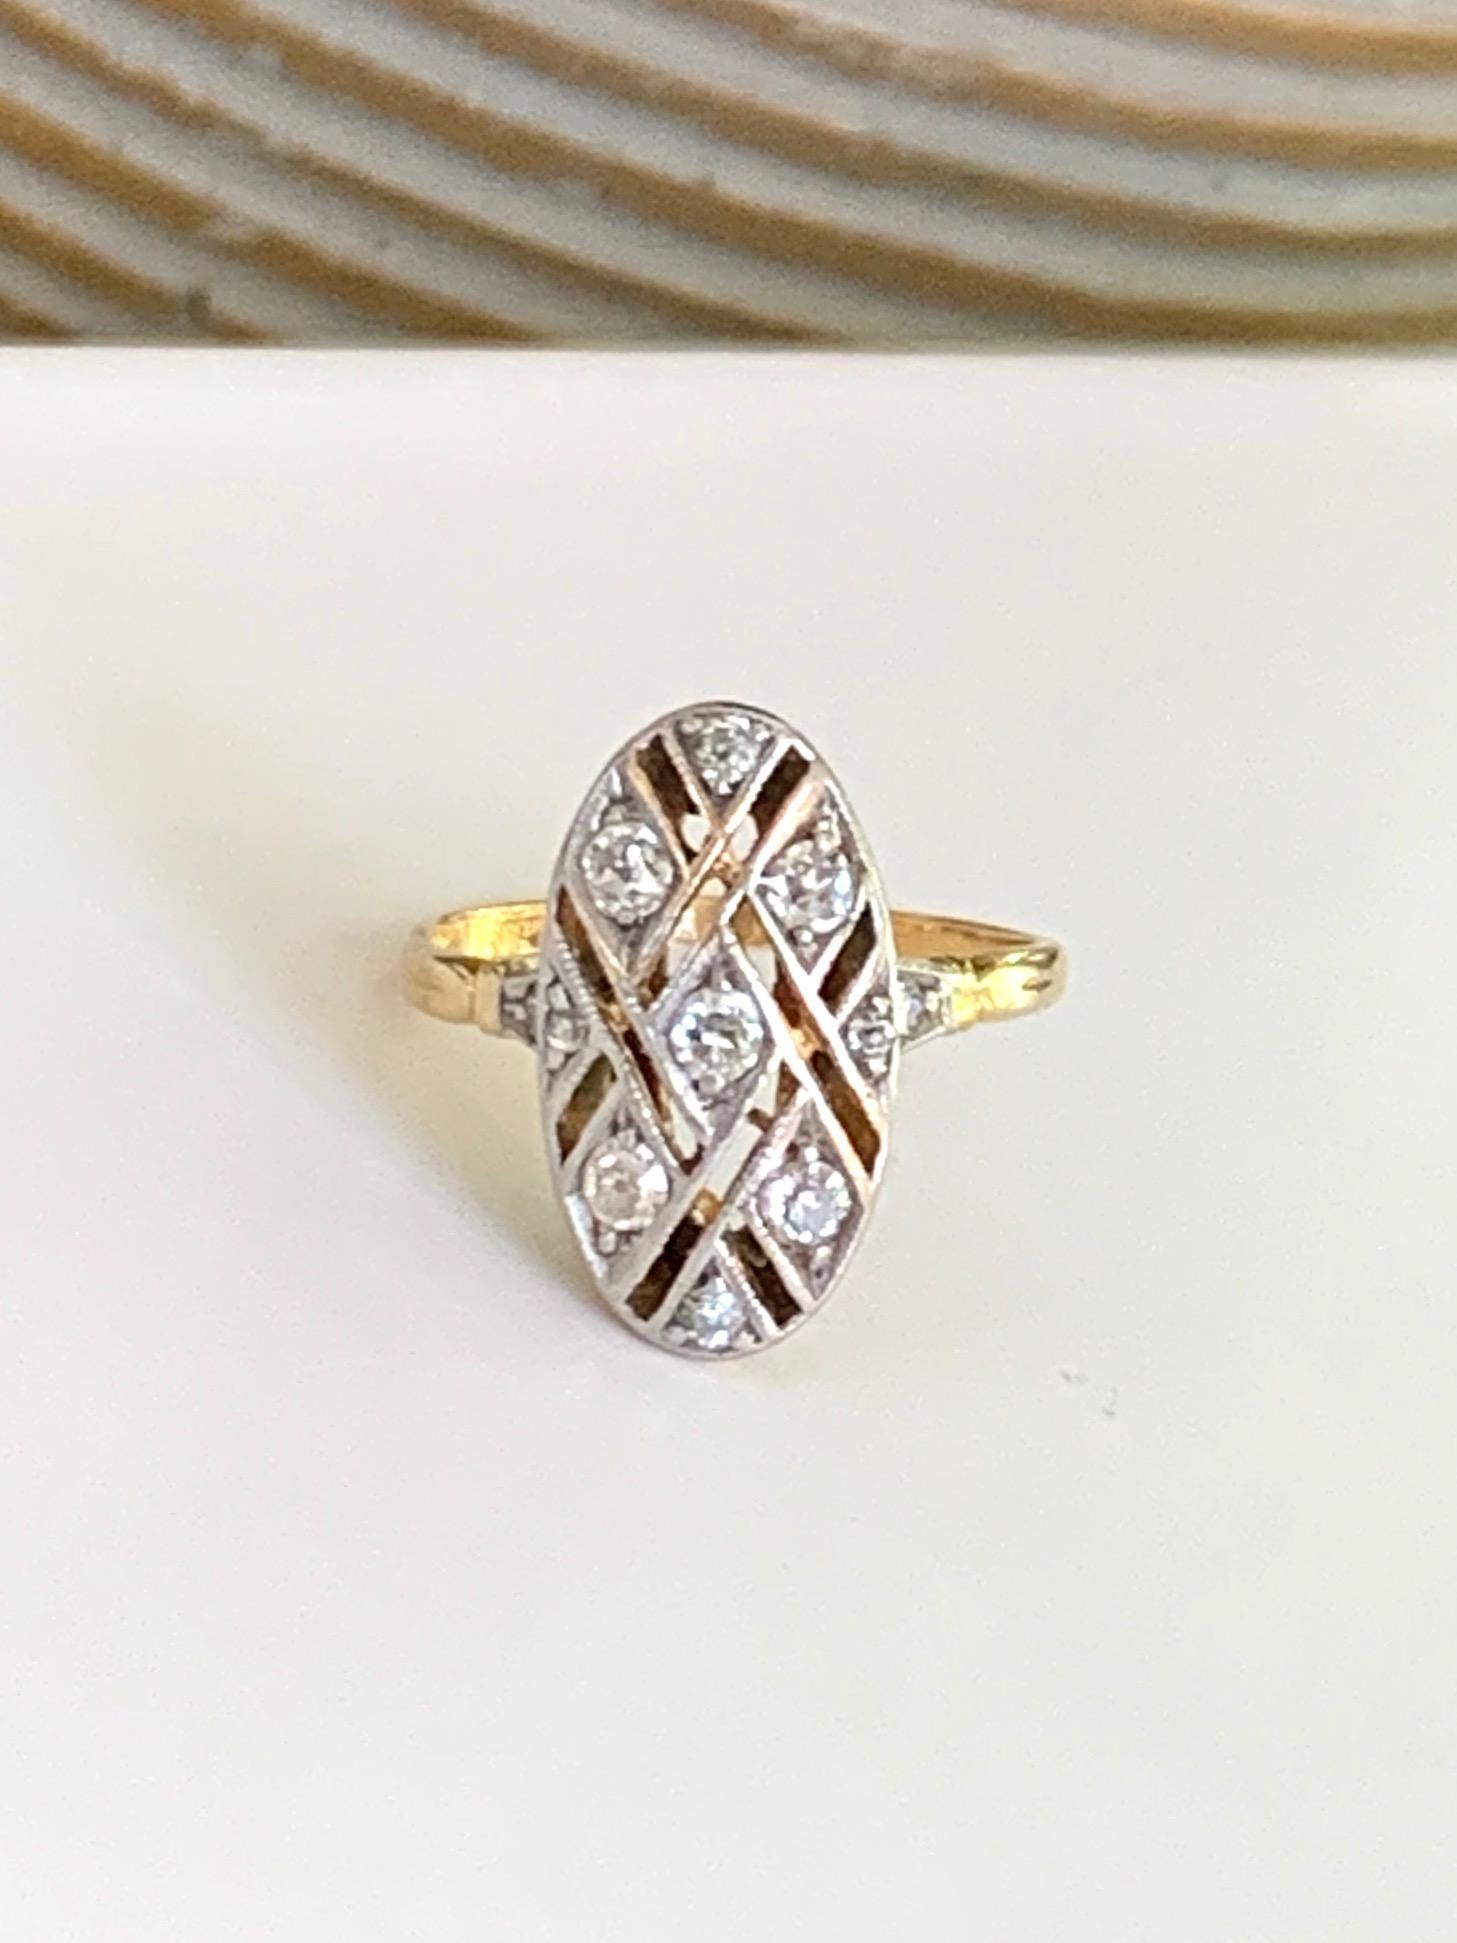 This vintage ring is stunning with the open weave-work around each of the 11 Euro cut Diamonds.  The Diamonds total approximately .30ctw with an average grade of SI-H.

Size: 5 - this ring is resizable but G. Lindberg Jewels does not provide sizing